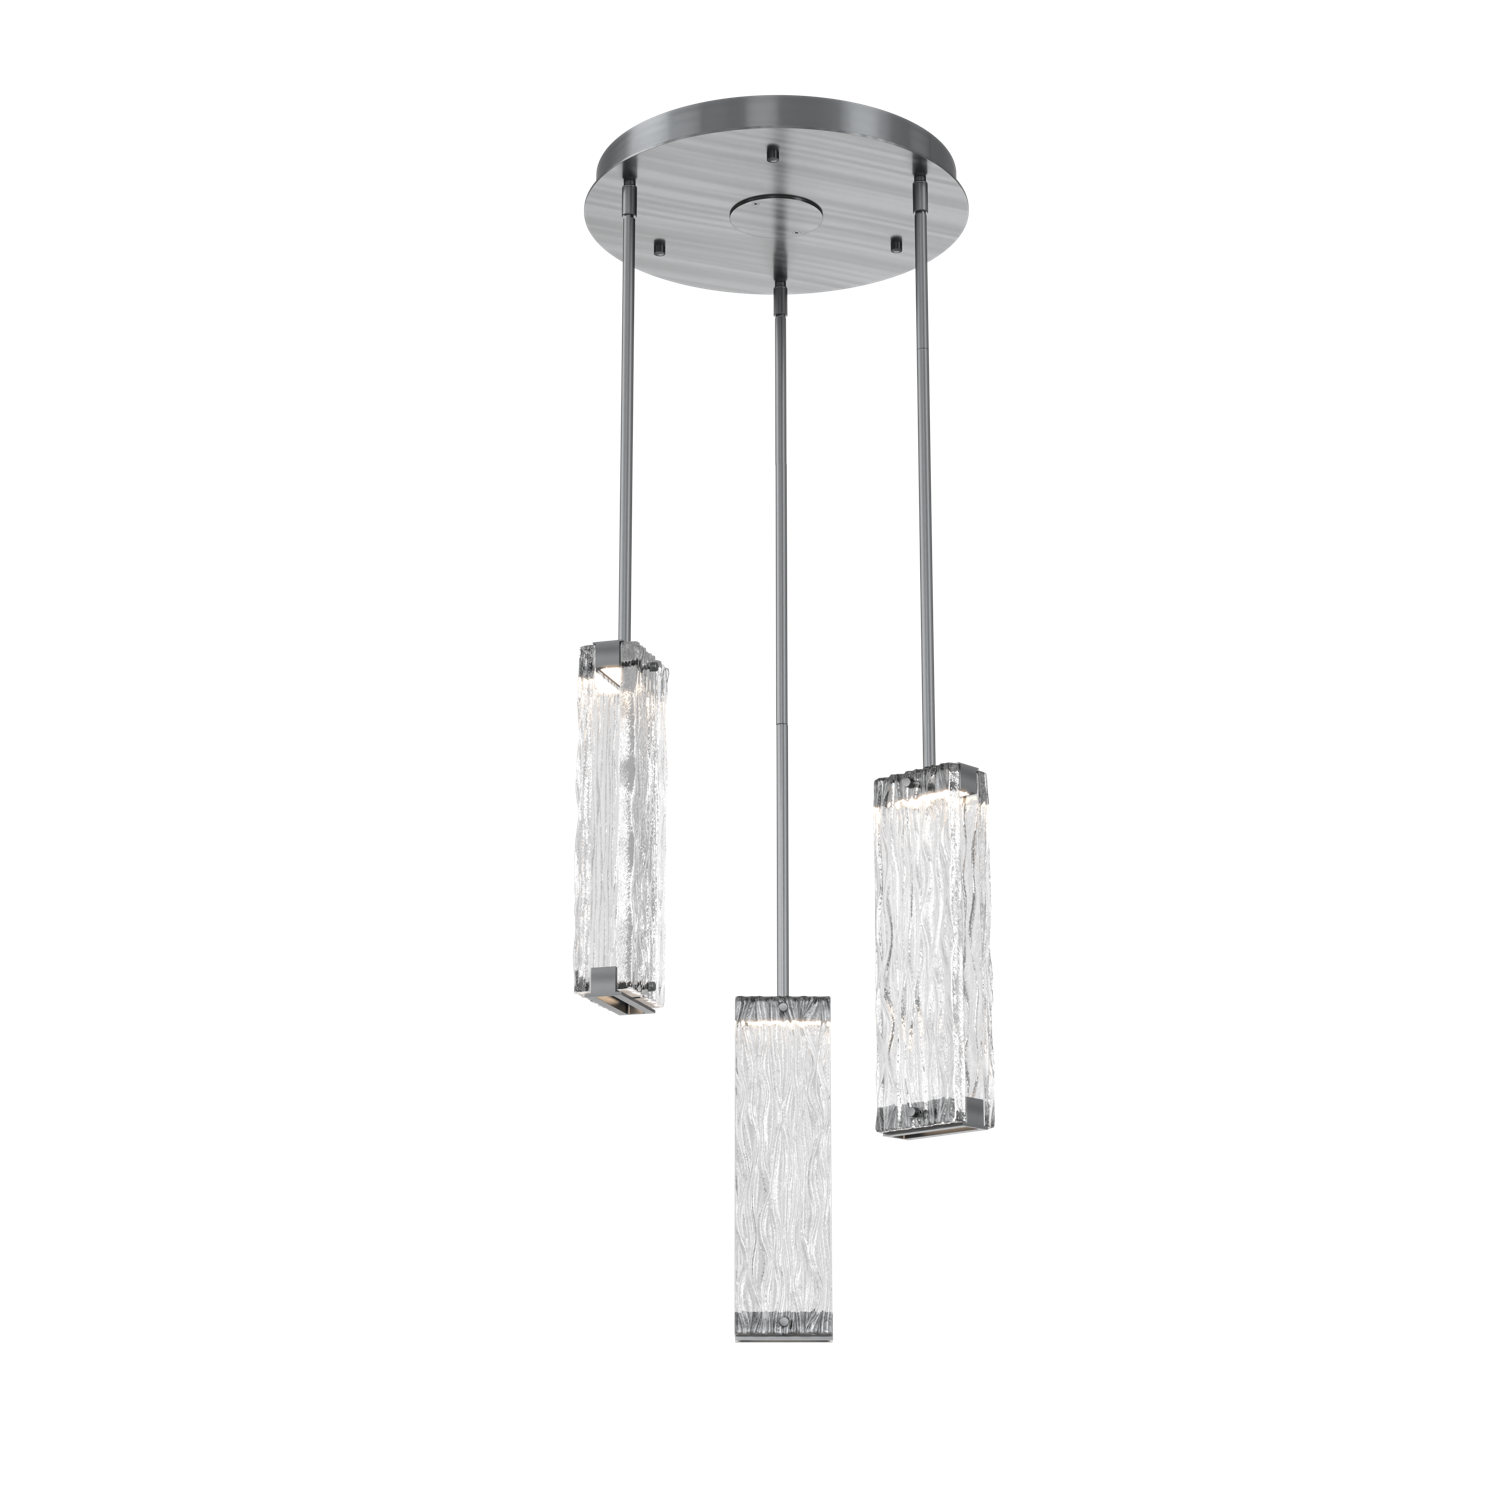 CHB0090-03-GM-TT-Hammerton-Studio-Tabulo-3-light-multi-pendant-chandelier-with-gunmetal-finish-and-clear-tidal-cast-glass-shade-and-LED-lamping